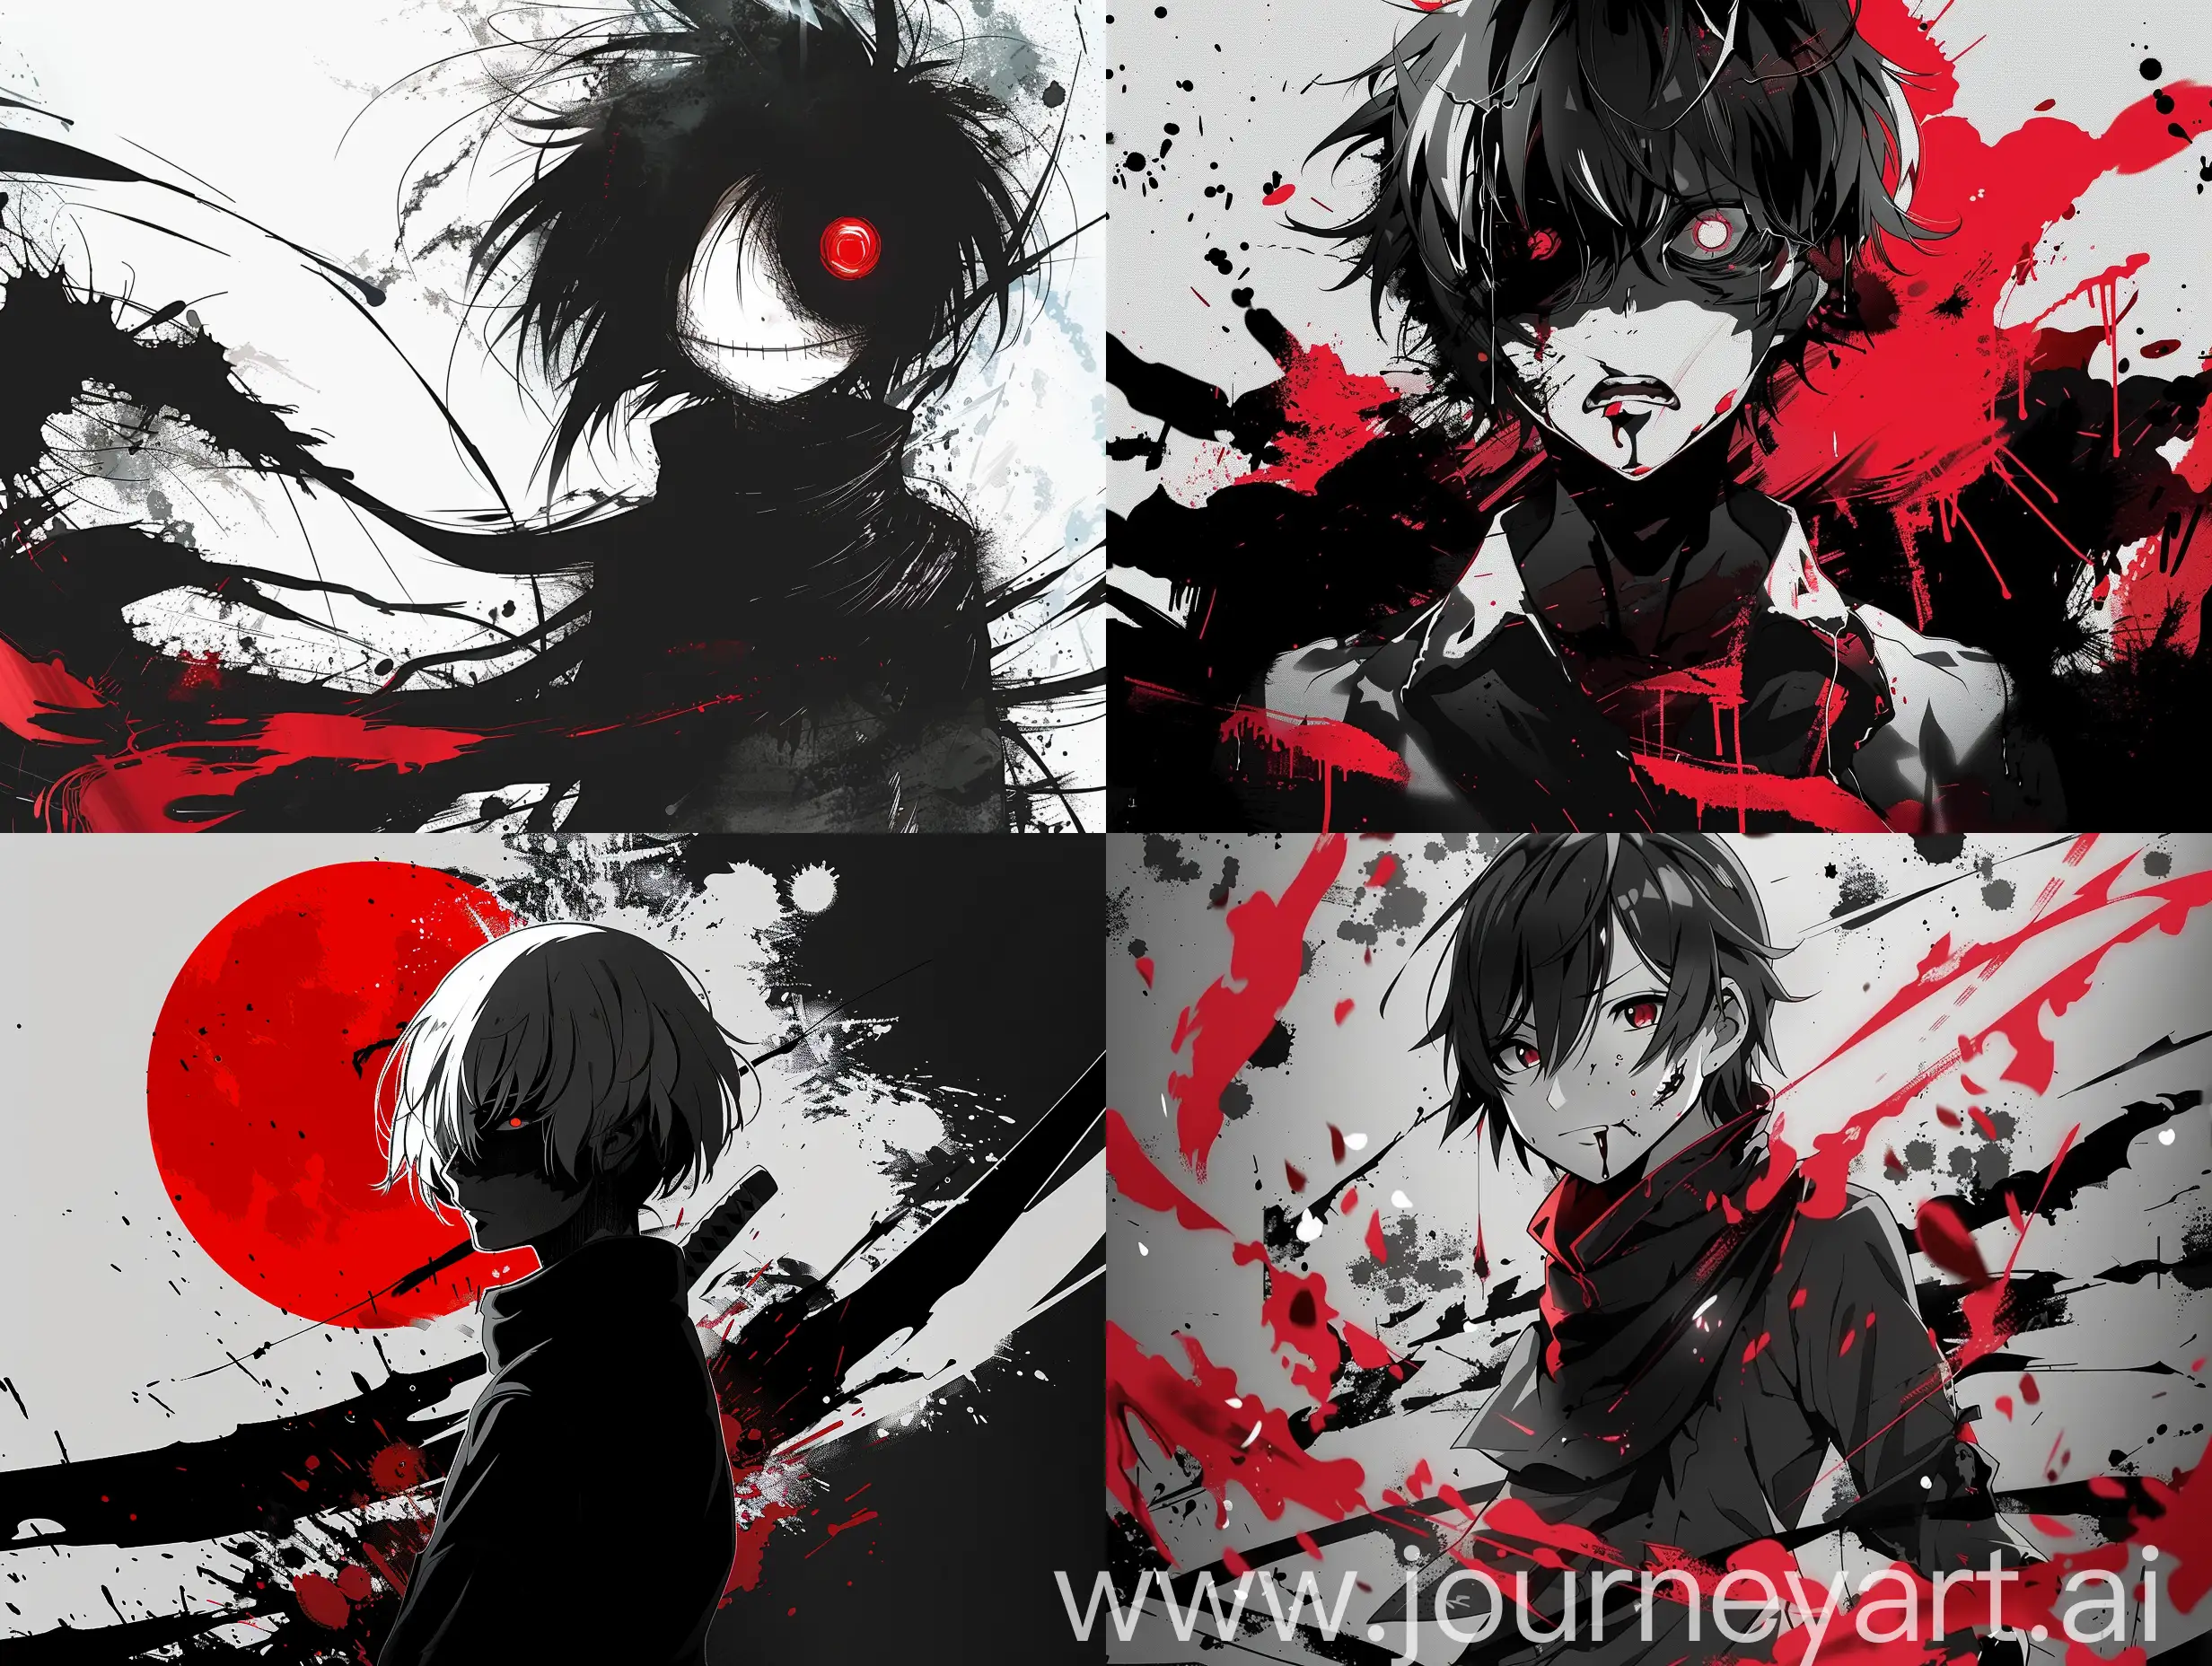 Dynamic-AnimeStyle-Banner-Featuring-Akudama-Drives-Maniac-Character-in-Black-Red-and-White-Tones